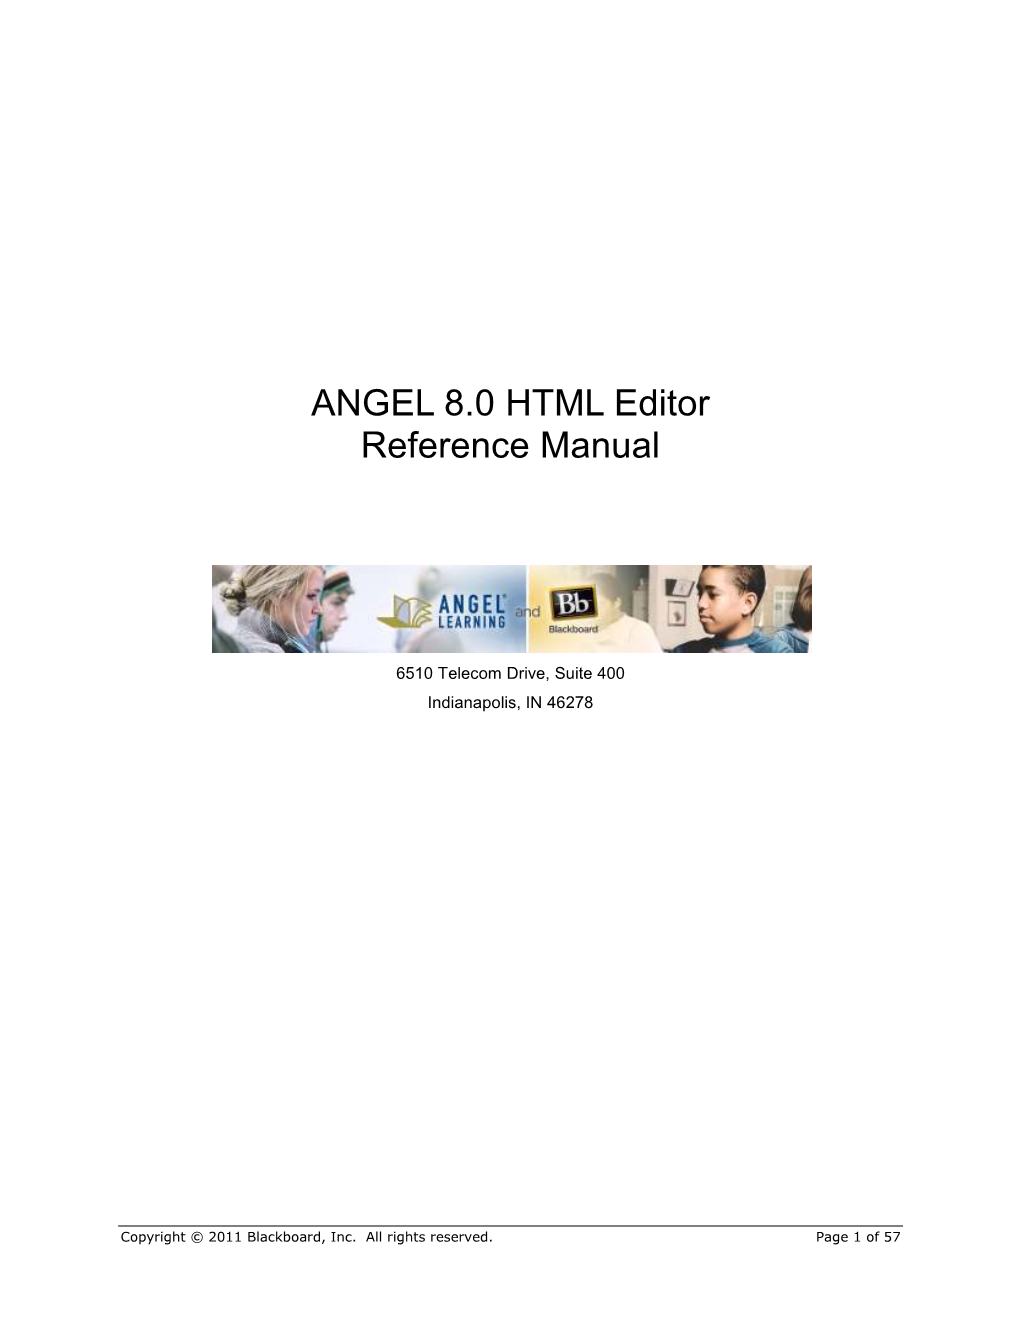 ANGEL 8.0 HTML Editor Reference Manual